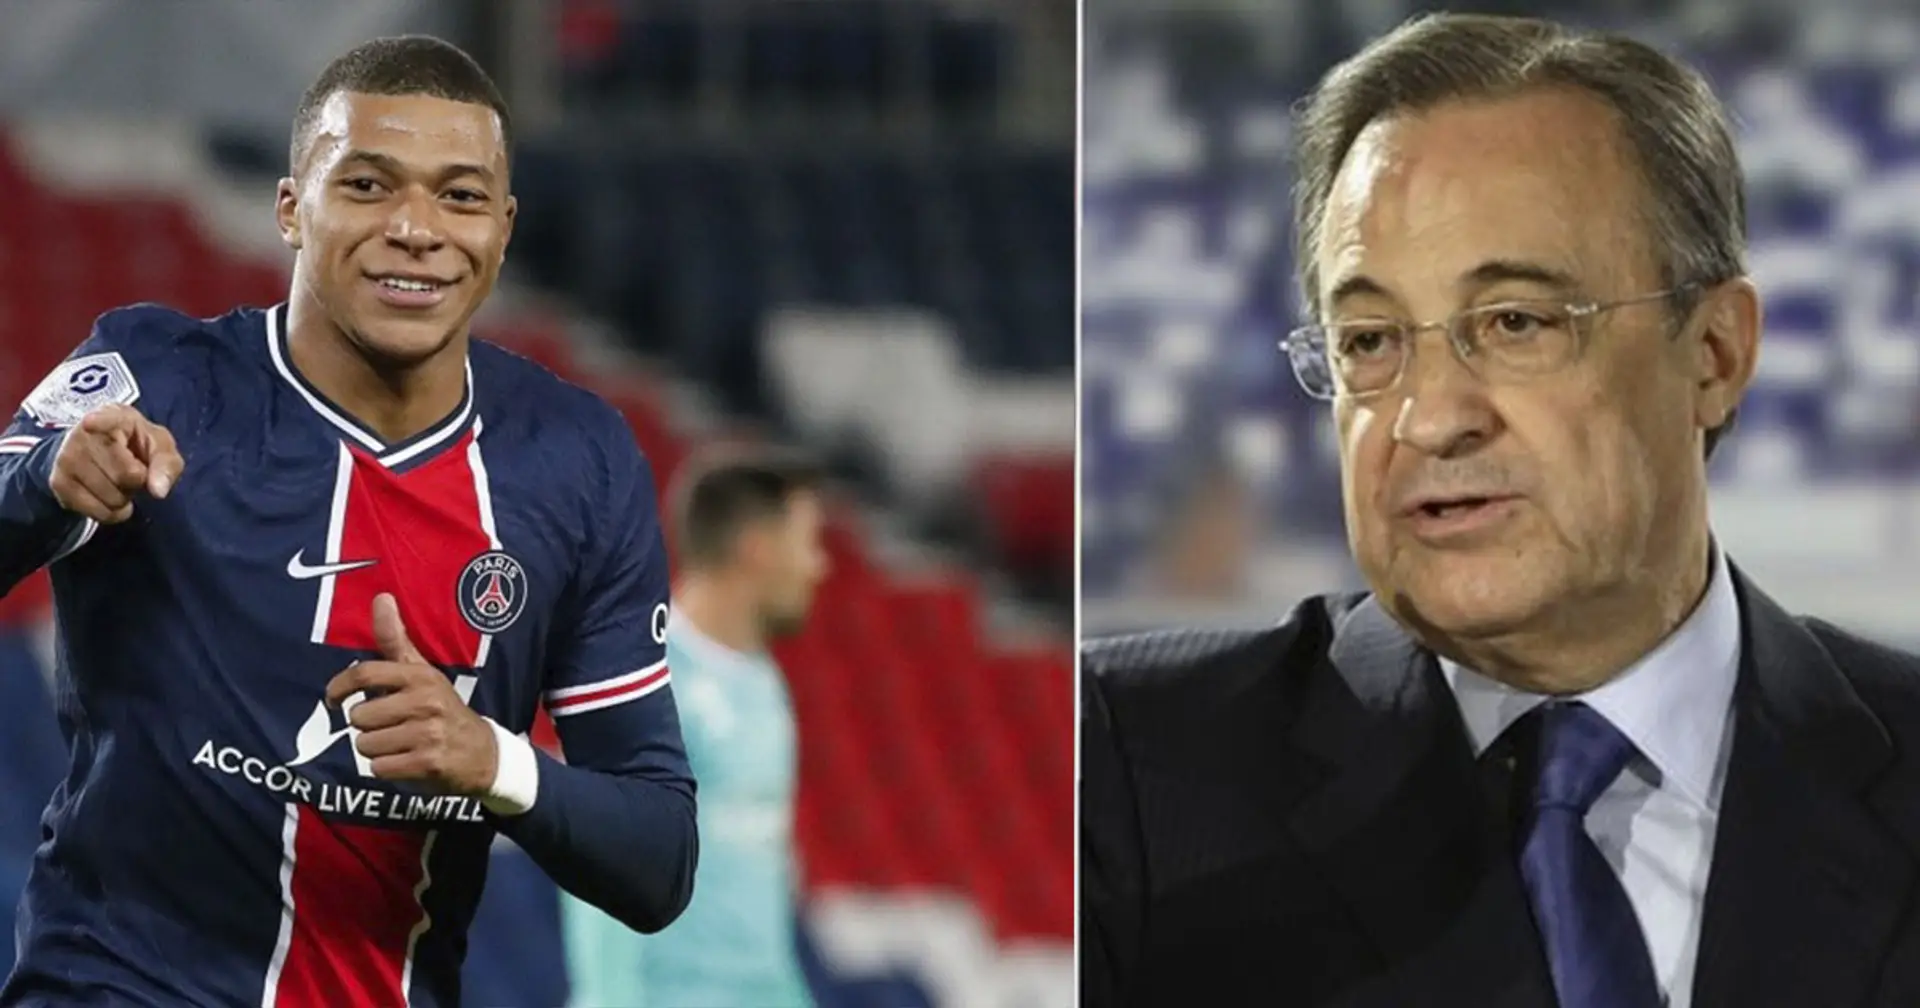 Revealed: Real Madrid prepare monstrous contract offer for Mbappe